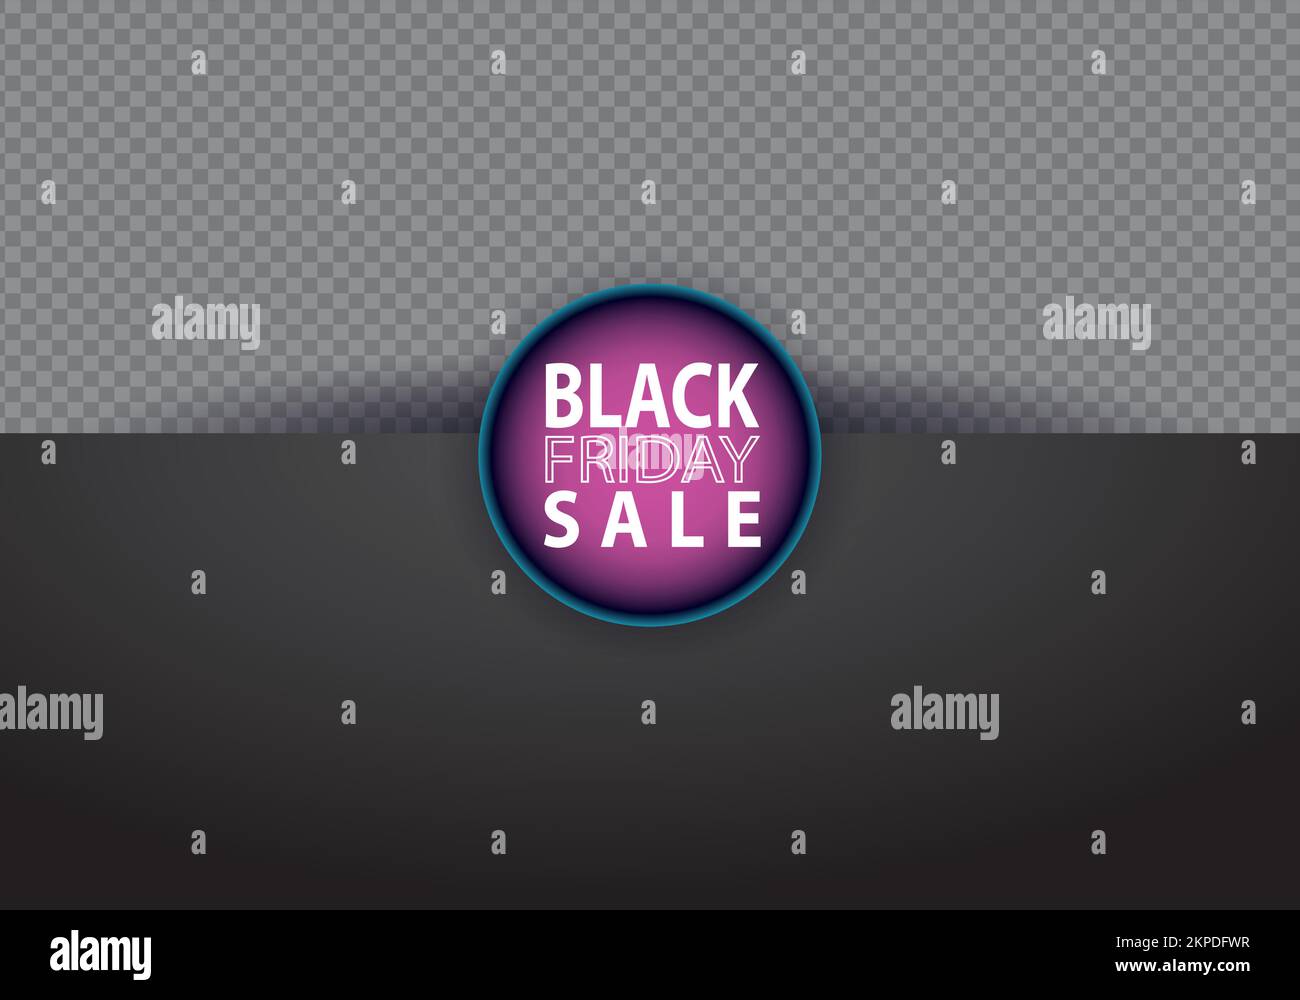 Black friday banners and social media templates. Stock Vector